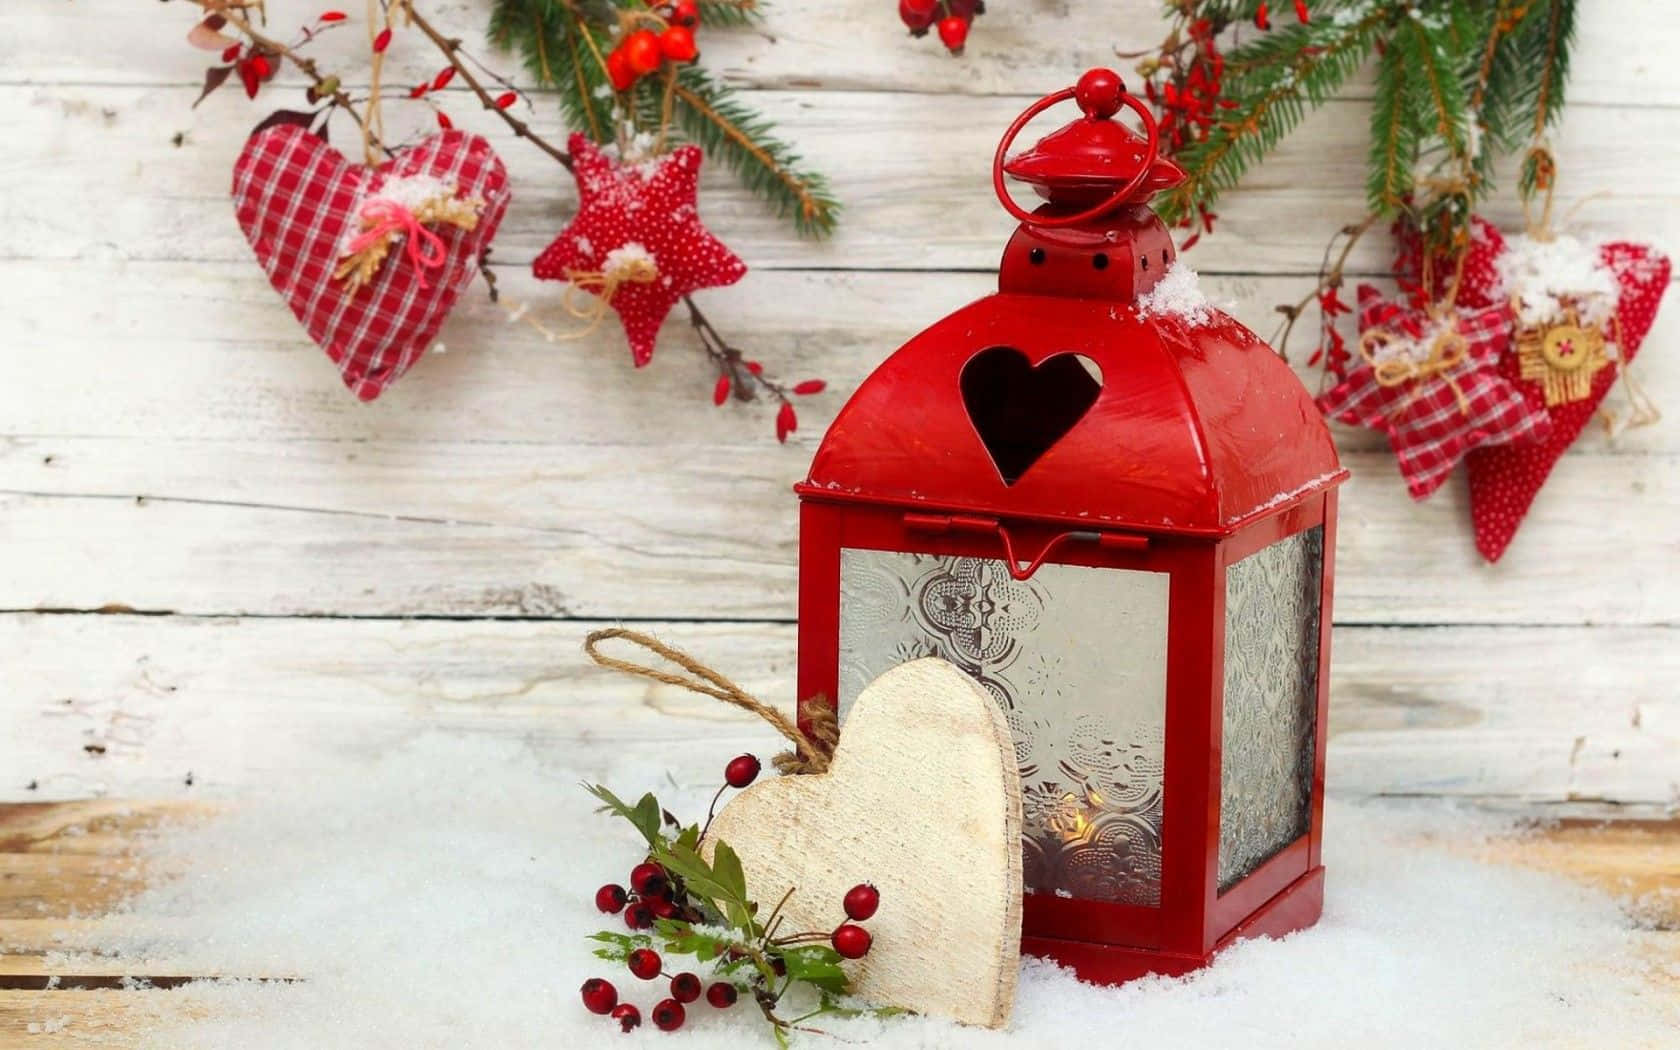 A Red Lantern With A Heart And A Wreath On A Snowy Background